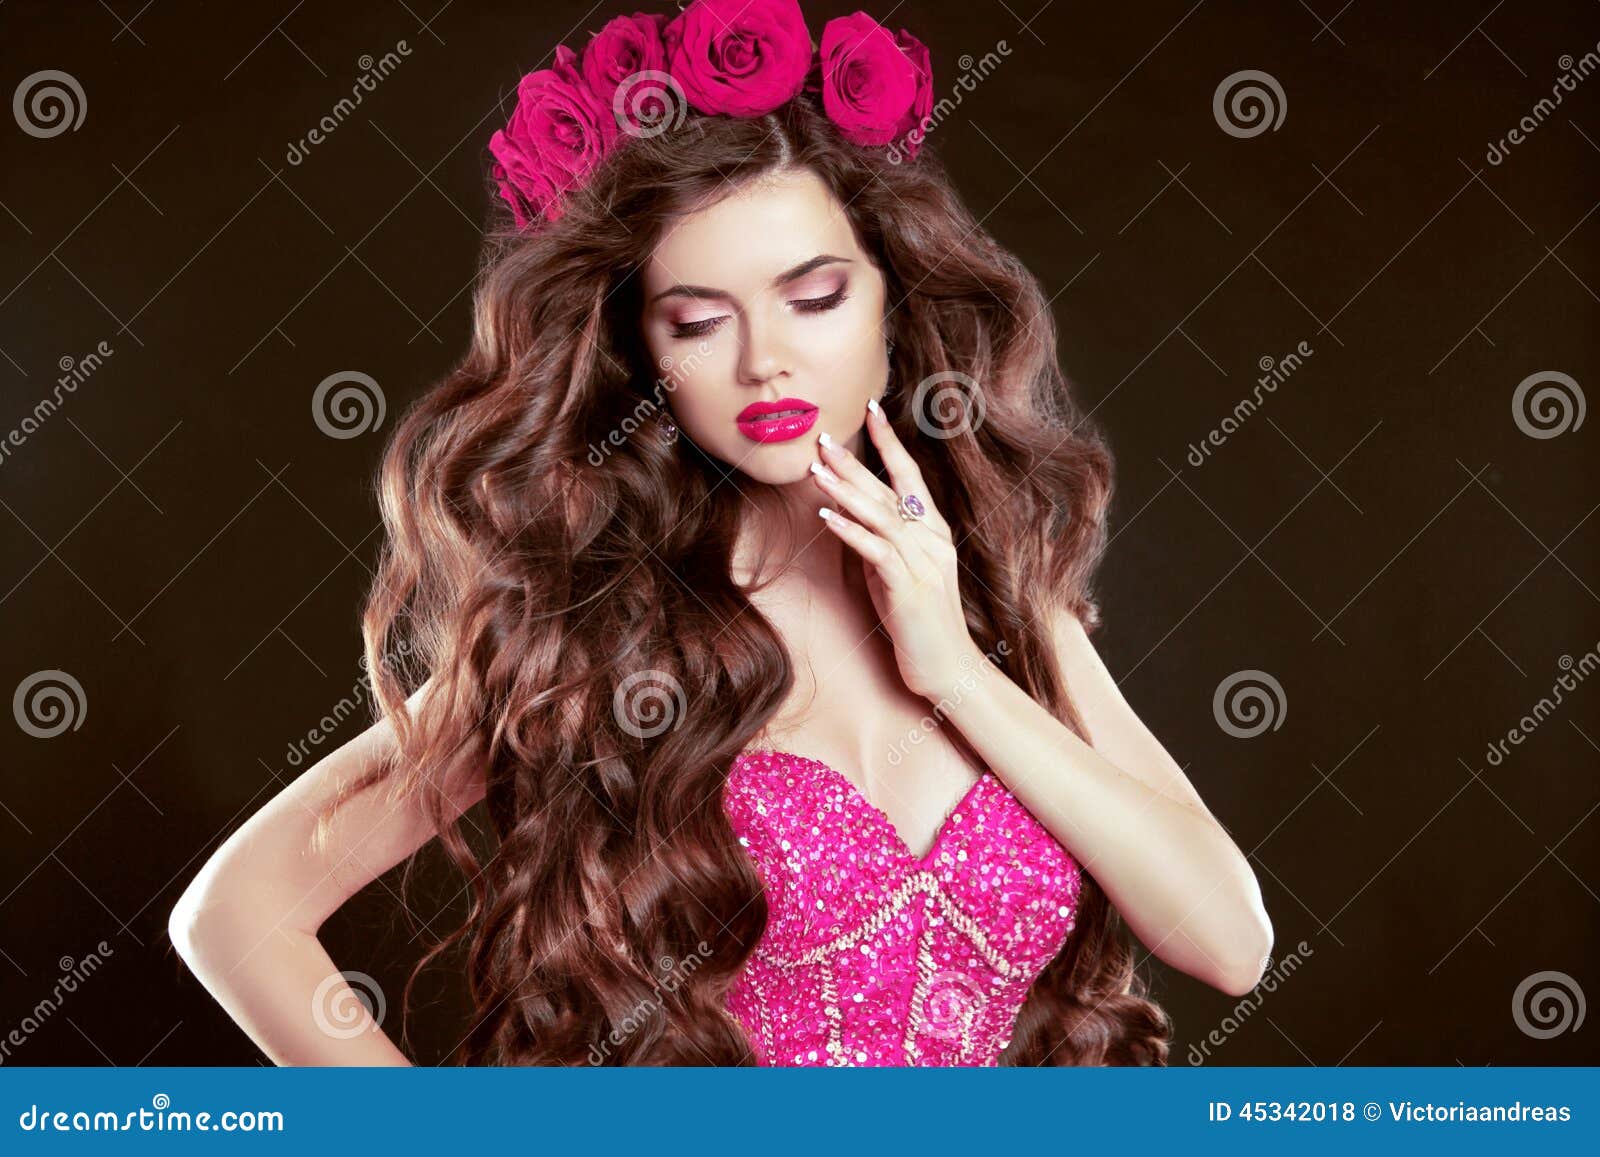 attractive girl with chaplet of roses on head, long wavy hair st